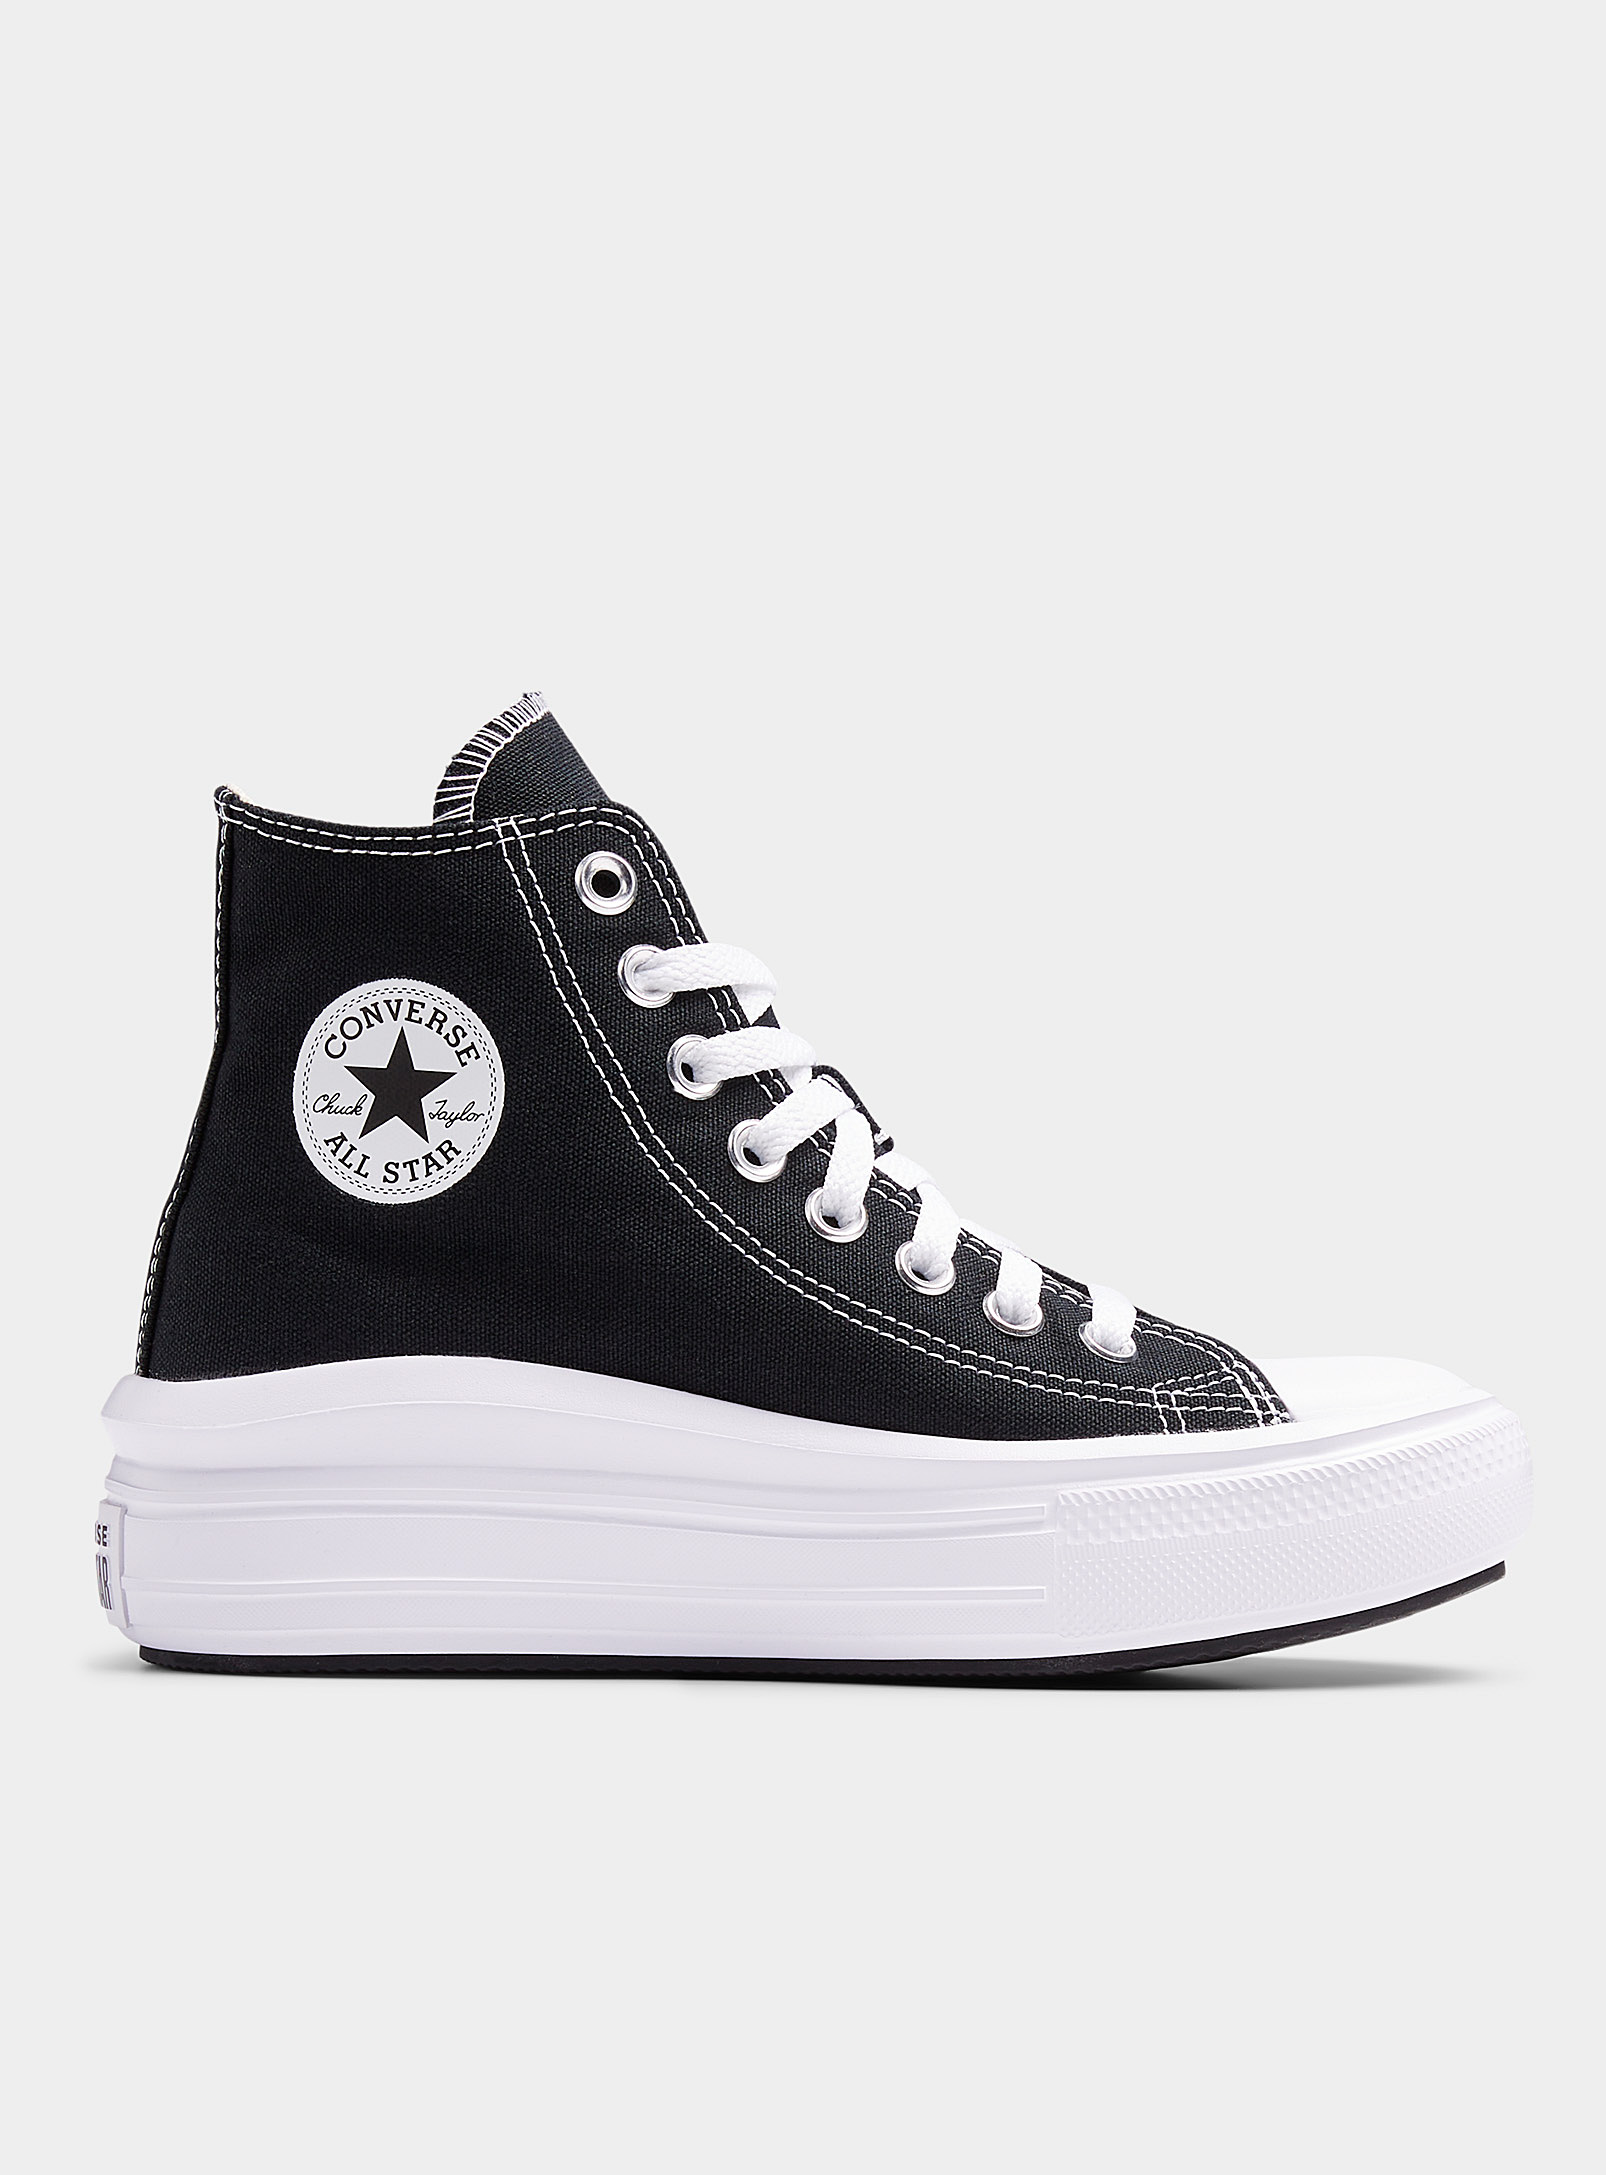 Converse Chuck Taylor All Star Move High Top Platform Sneakers Women In Black